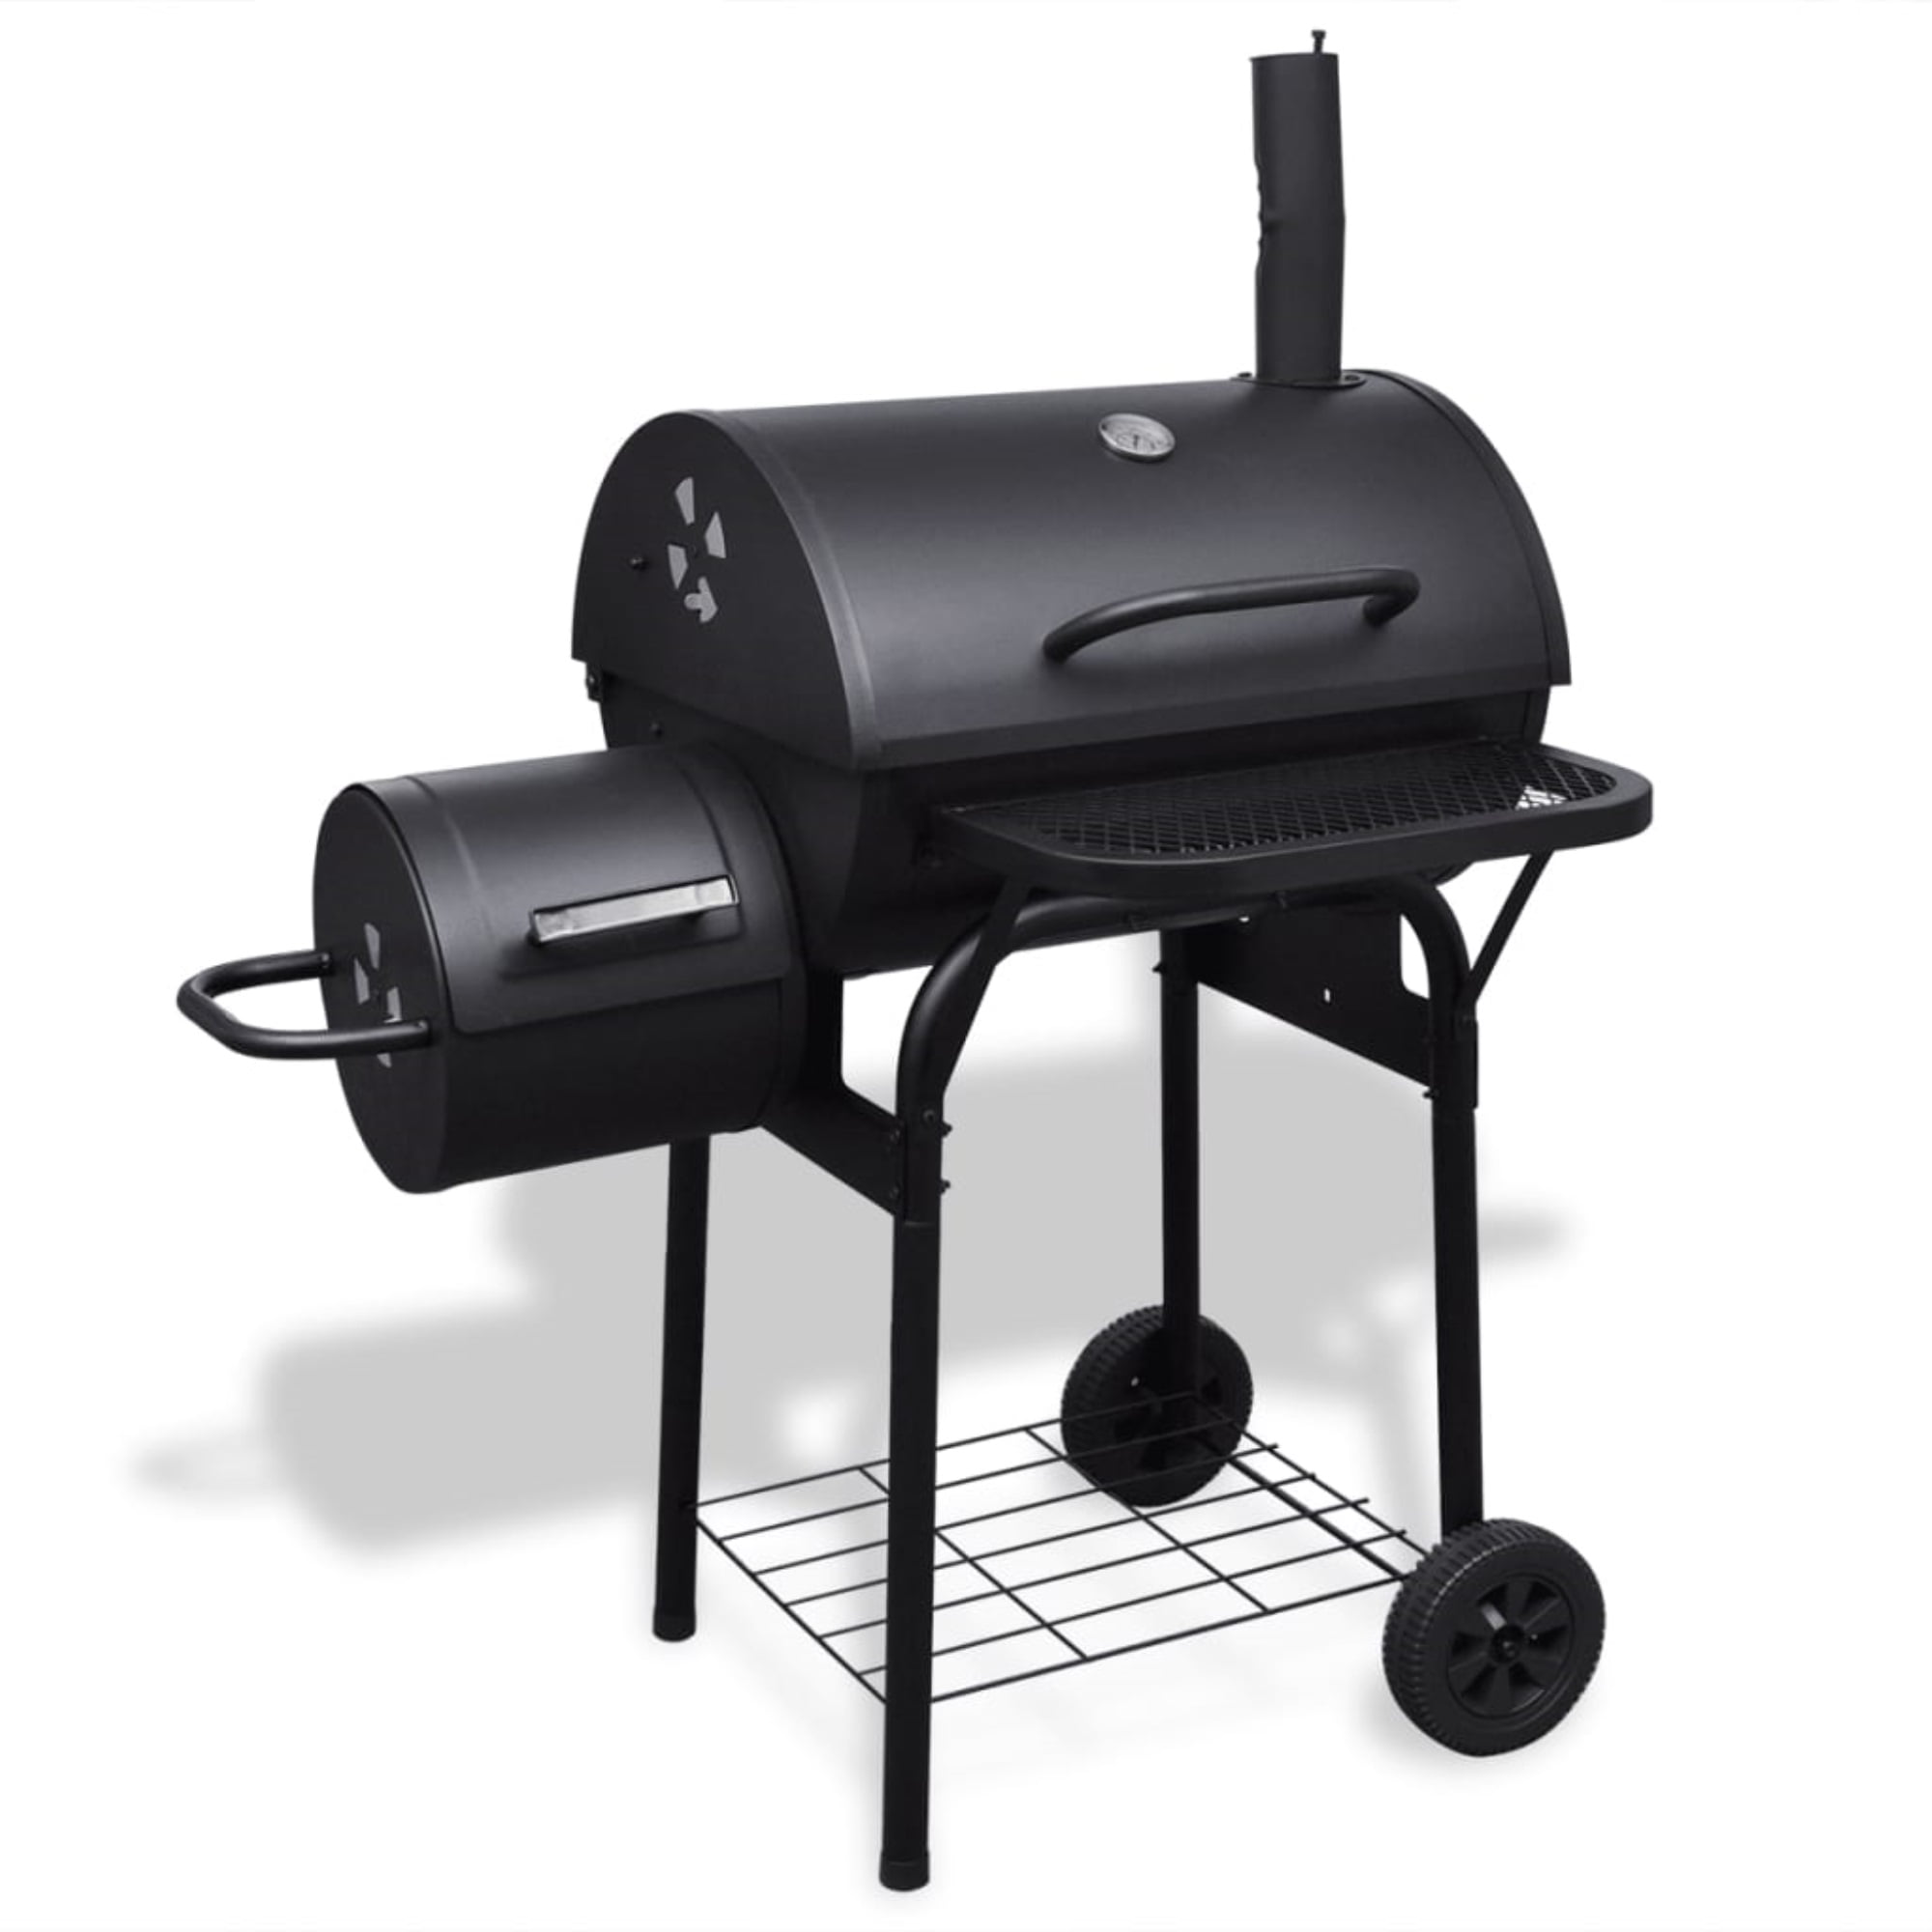 Goplus Outdoor BBQ Grill Charcoal Barbecue Pit Patio Backyard Meat Cooker Smoker 